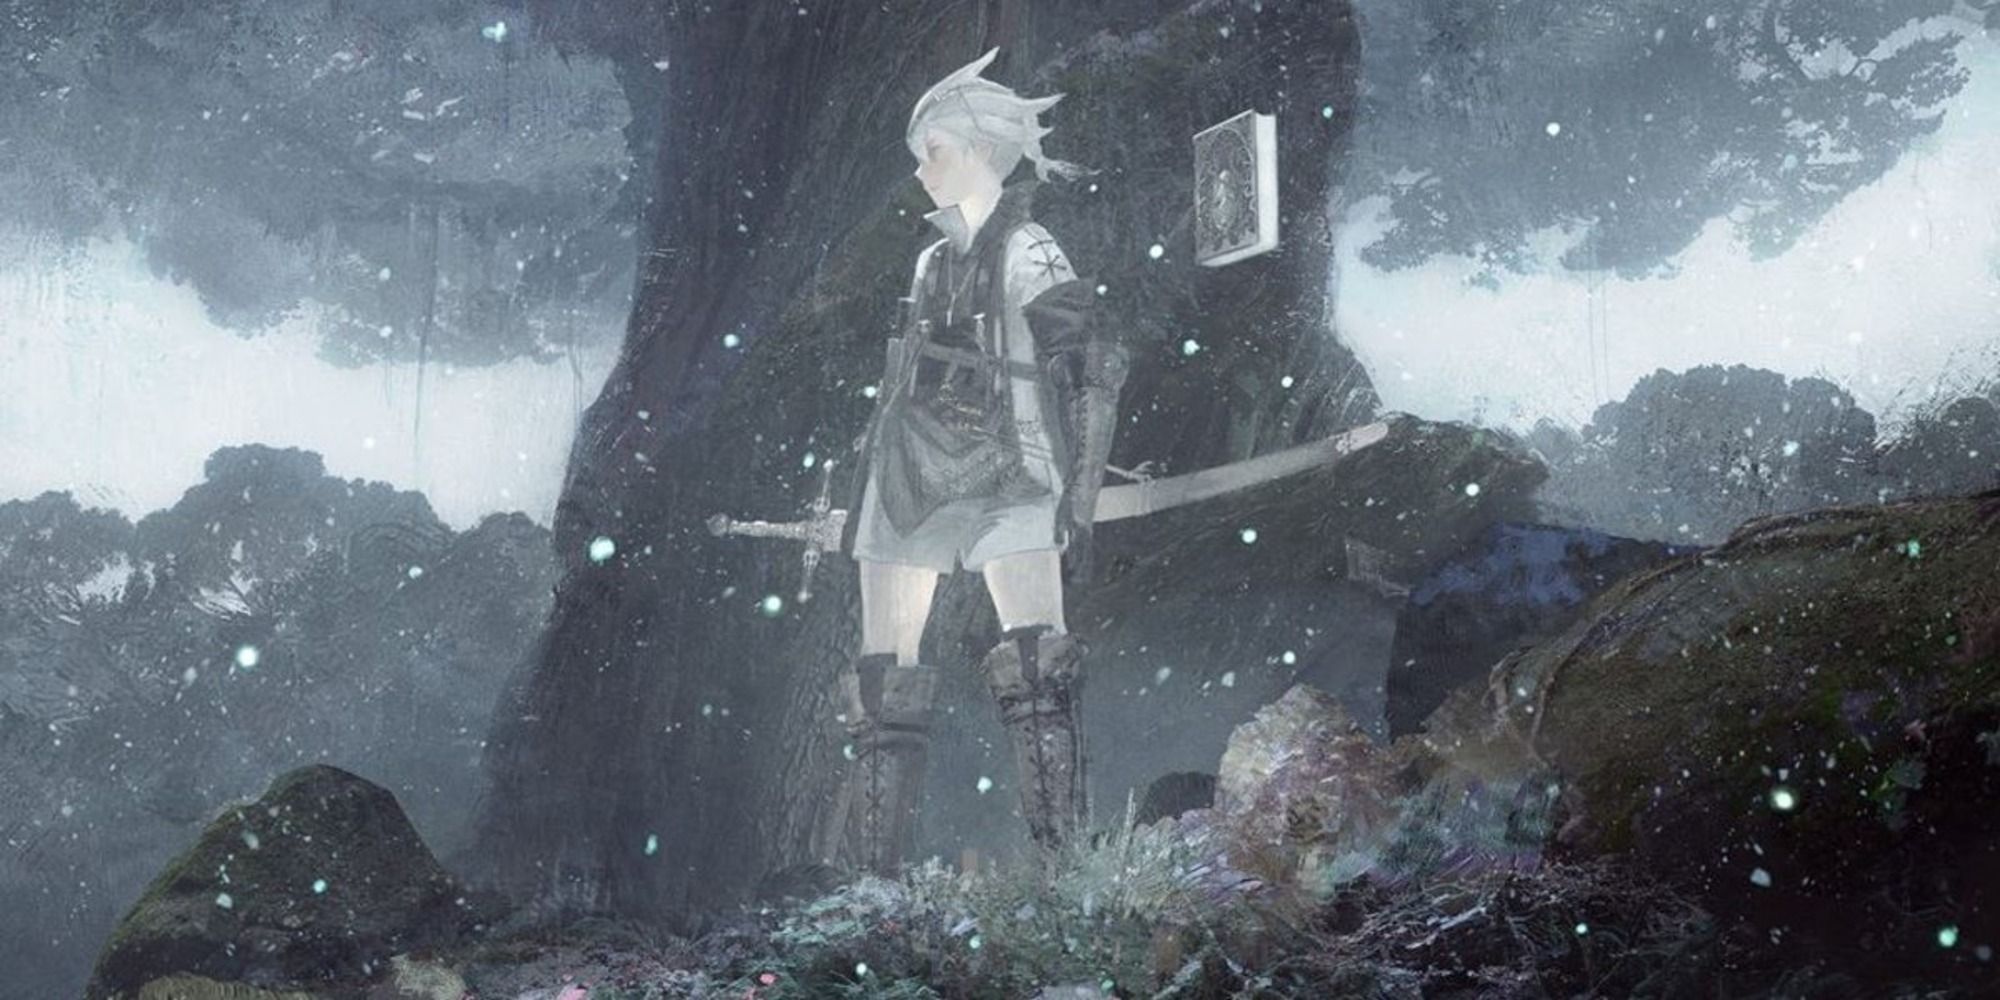 NieR Replicant Ver 1.22474487139 screenshot of Nier Brother and Grimoire Weiss standing in front of a tree